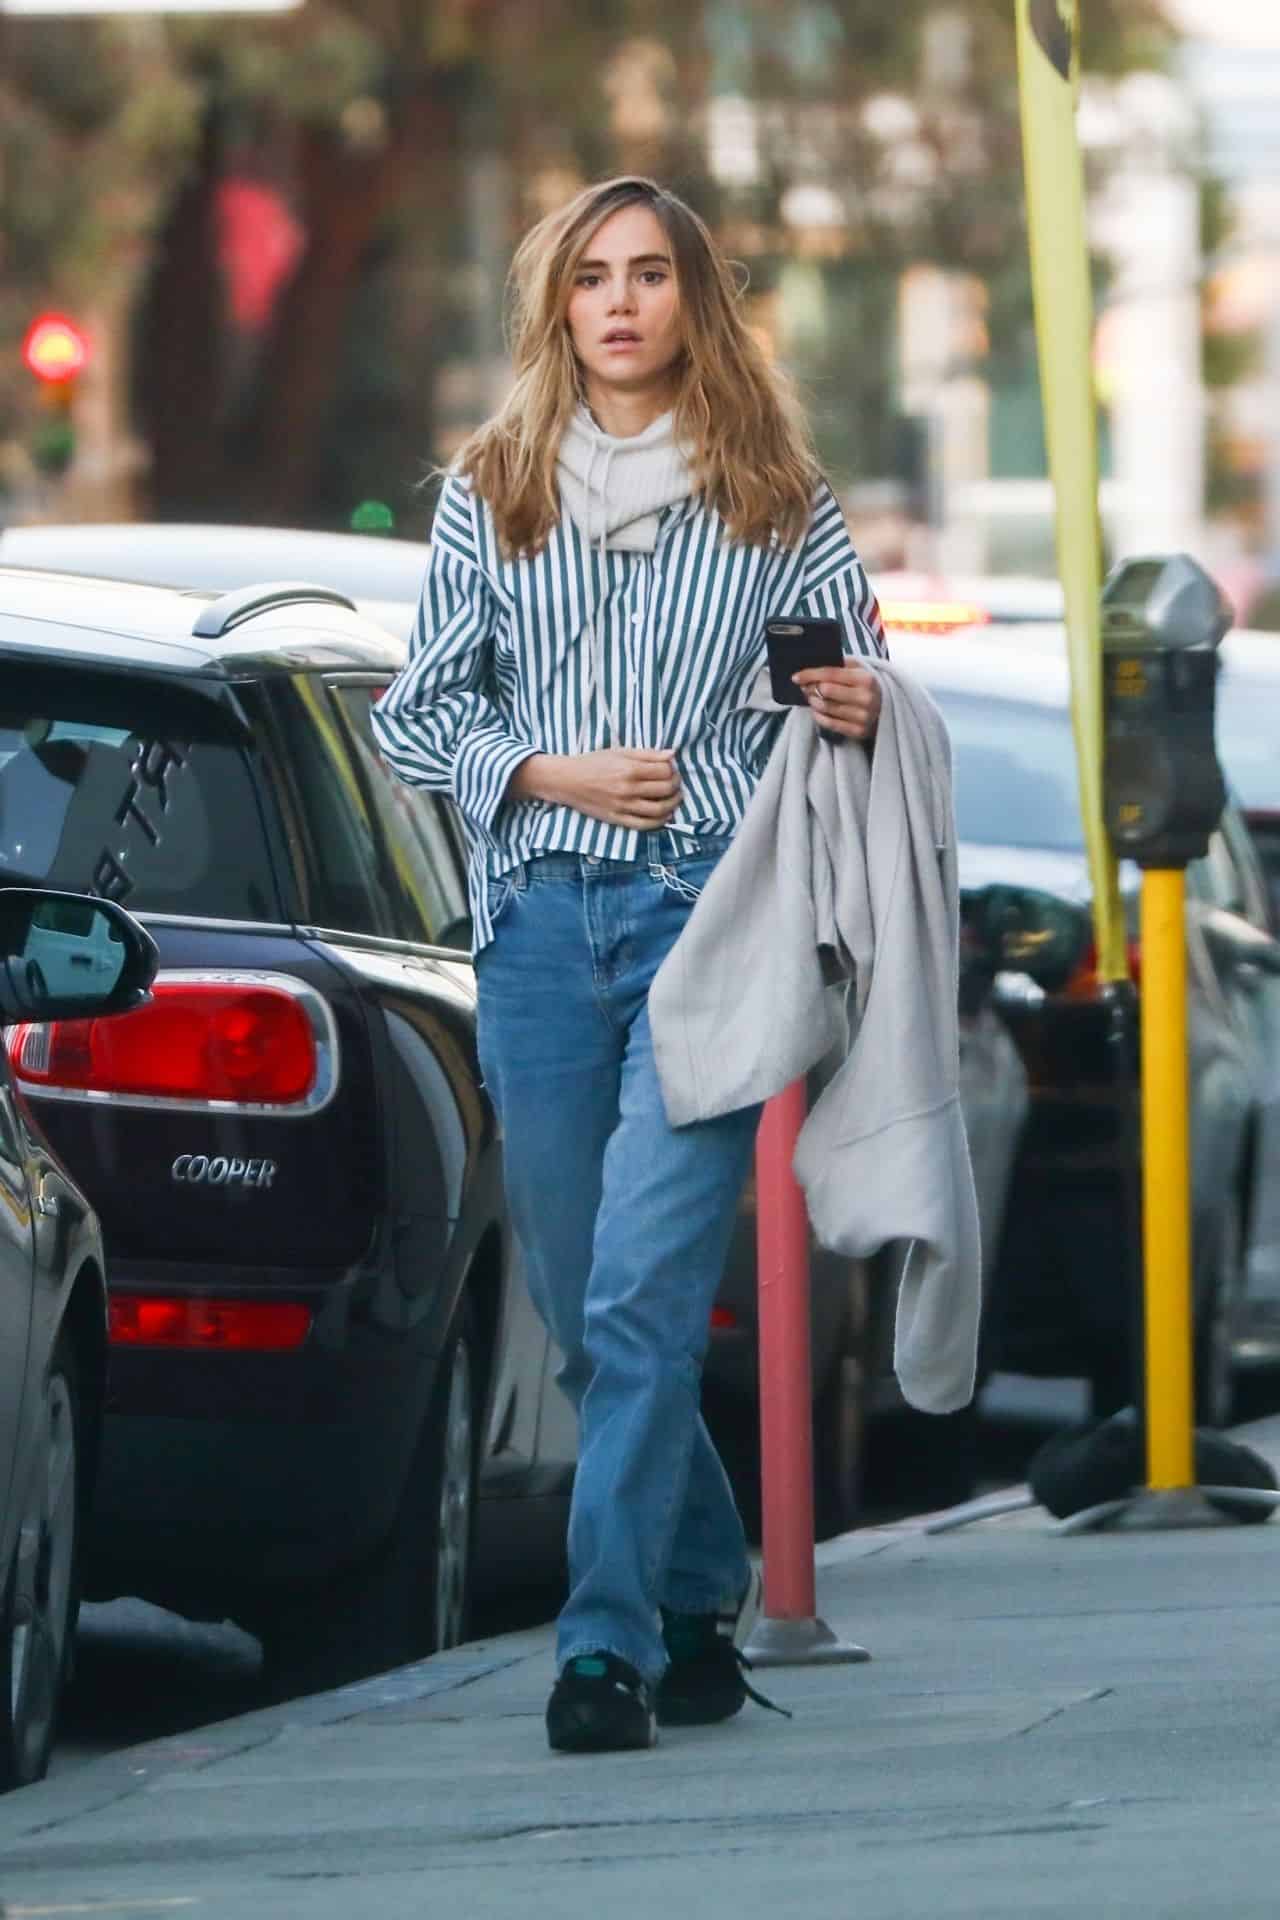 Suki Waterhouse Shows her Slim Waist while Posing for Sensual Snaps in WeHo